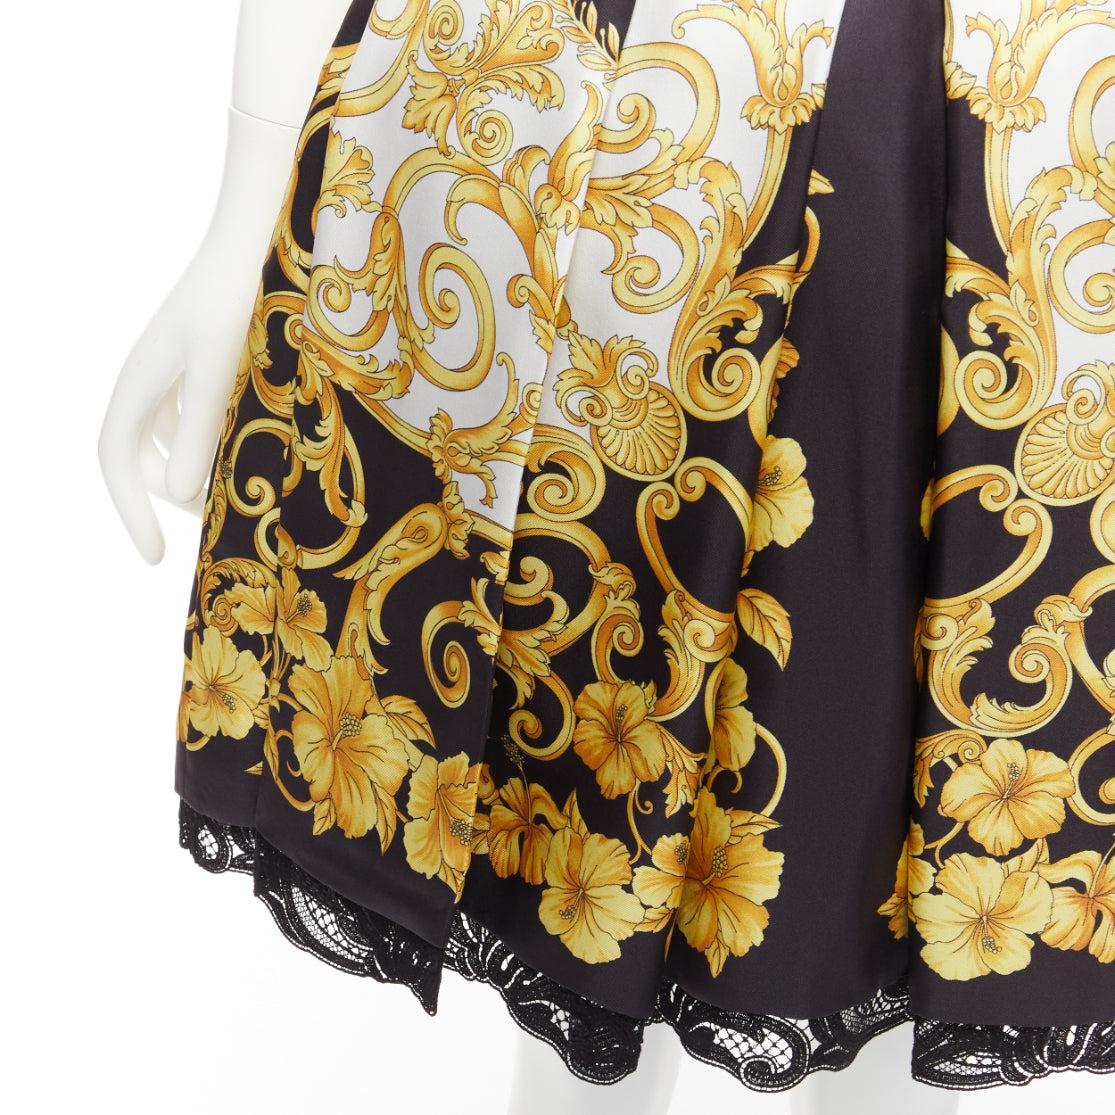 VERSACE 2018 100% silk Barocco Hibiscus print lace trimmed flared skirt IT36 XS
Reference: AAWC/A00581
Brand: Versace
Designer: Donatella Versace
Collection: 2018
Material: Silk, Cotton
Color: Gold, Black
Pattern: Floral
Closure: Zip
Lining: Fully